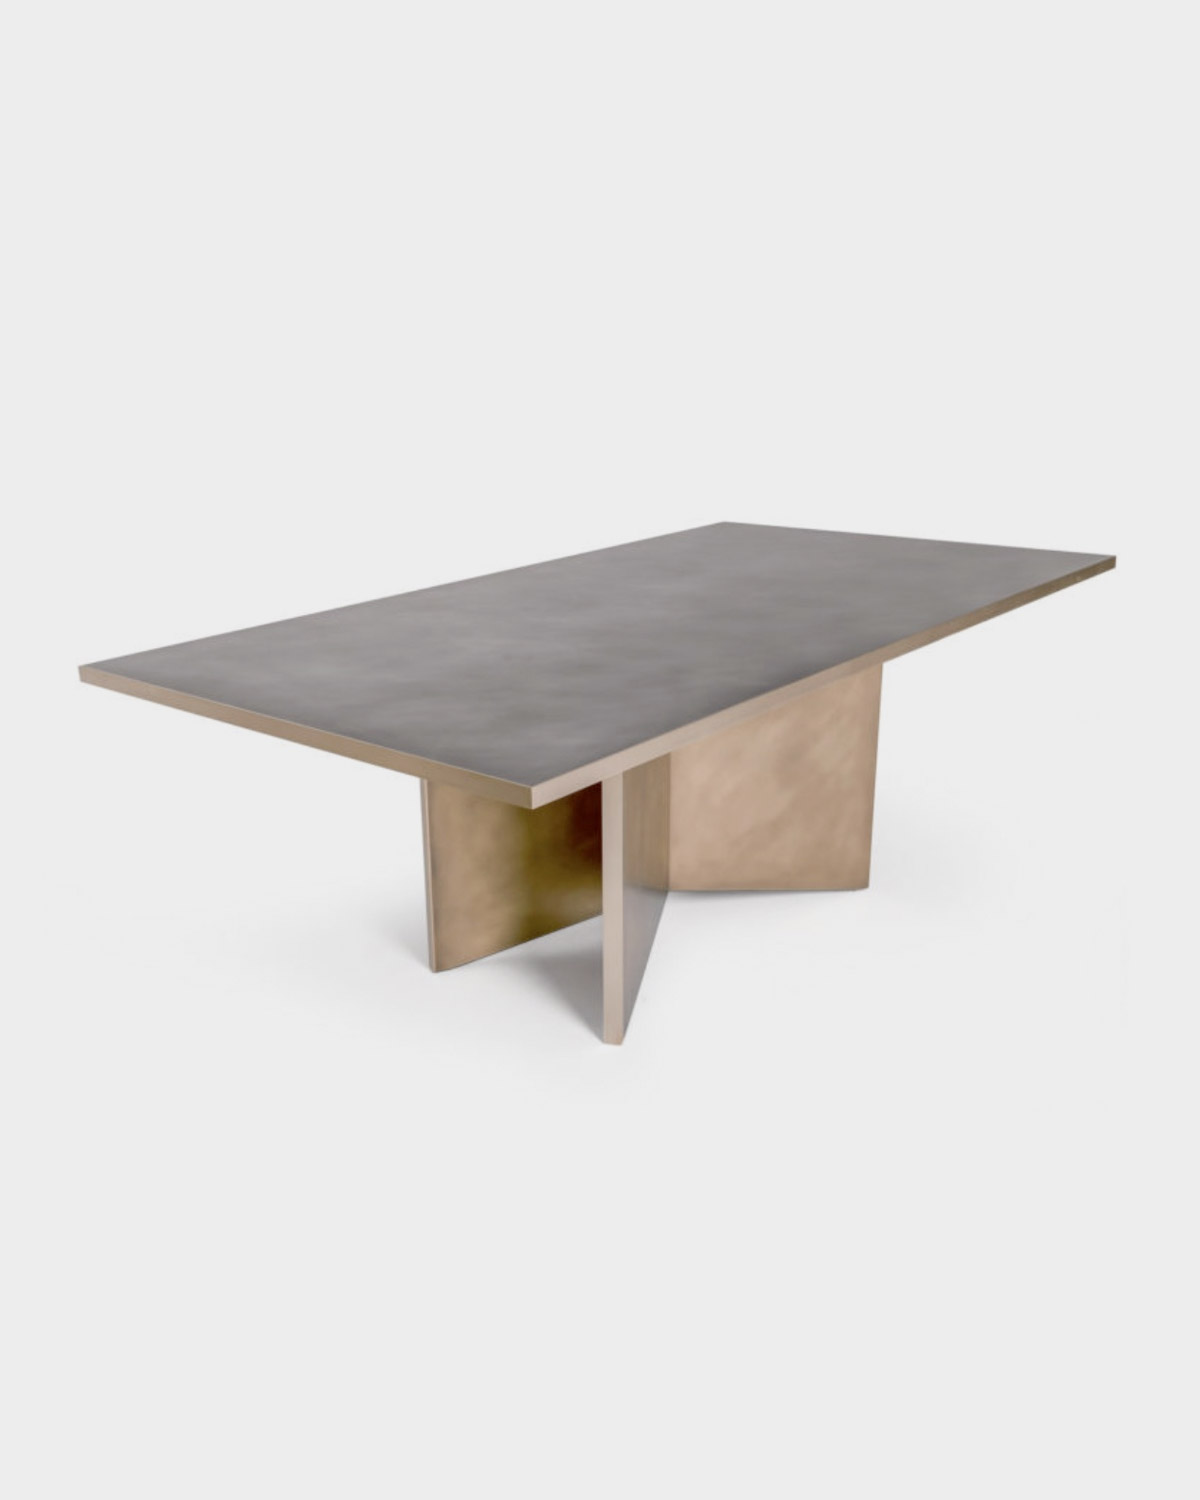 The Vega Dining Table by Wud